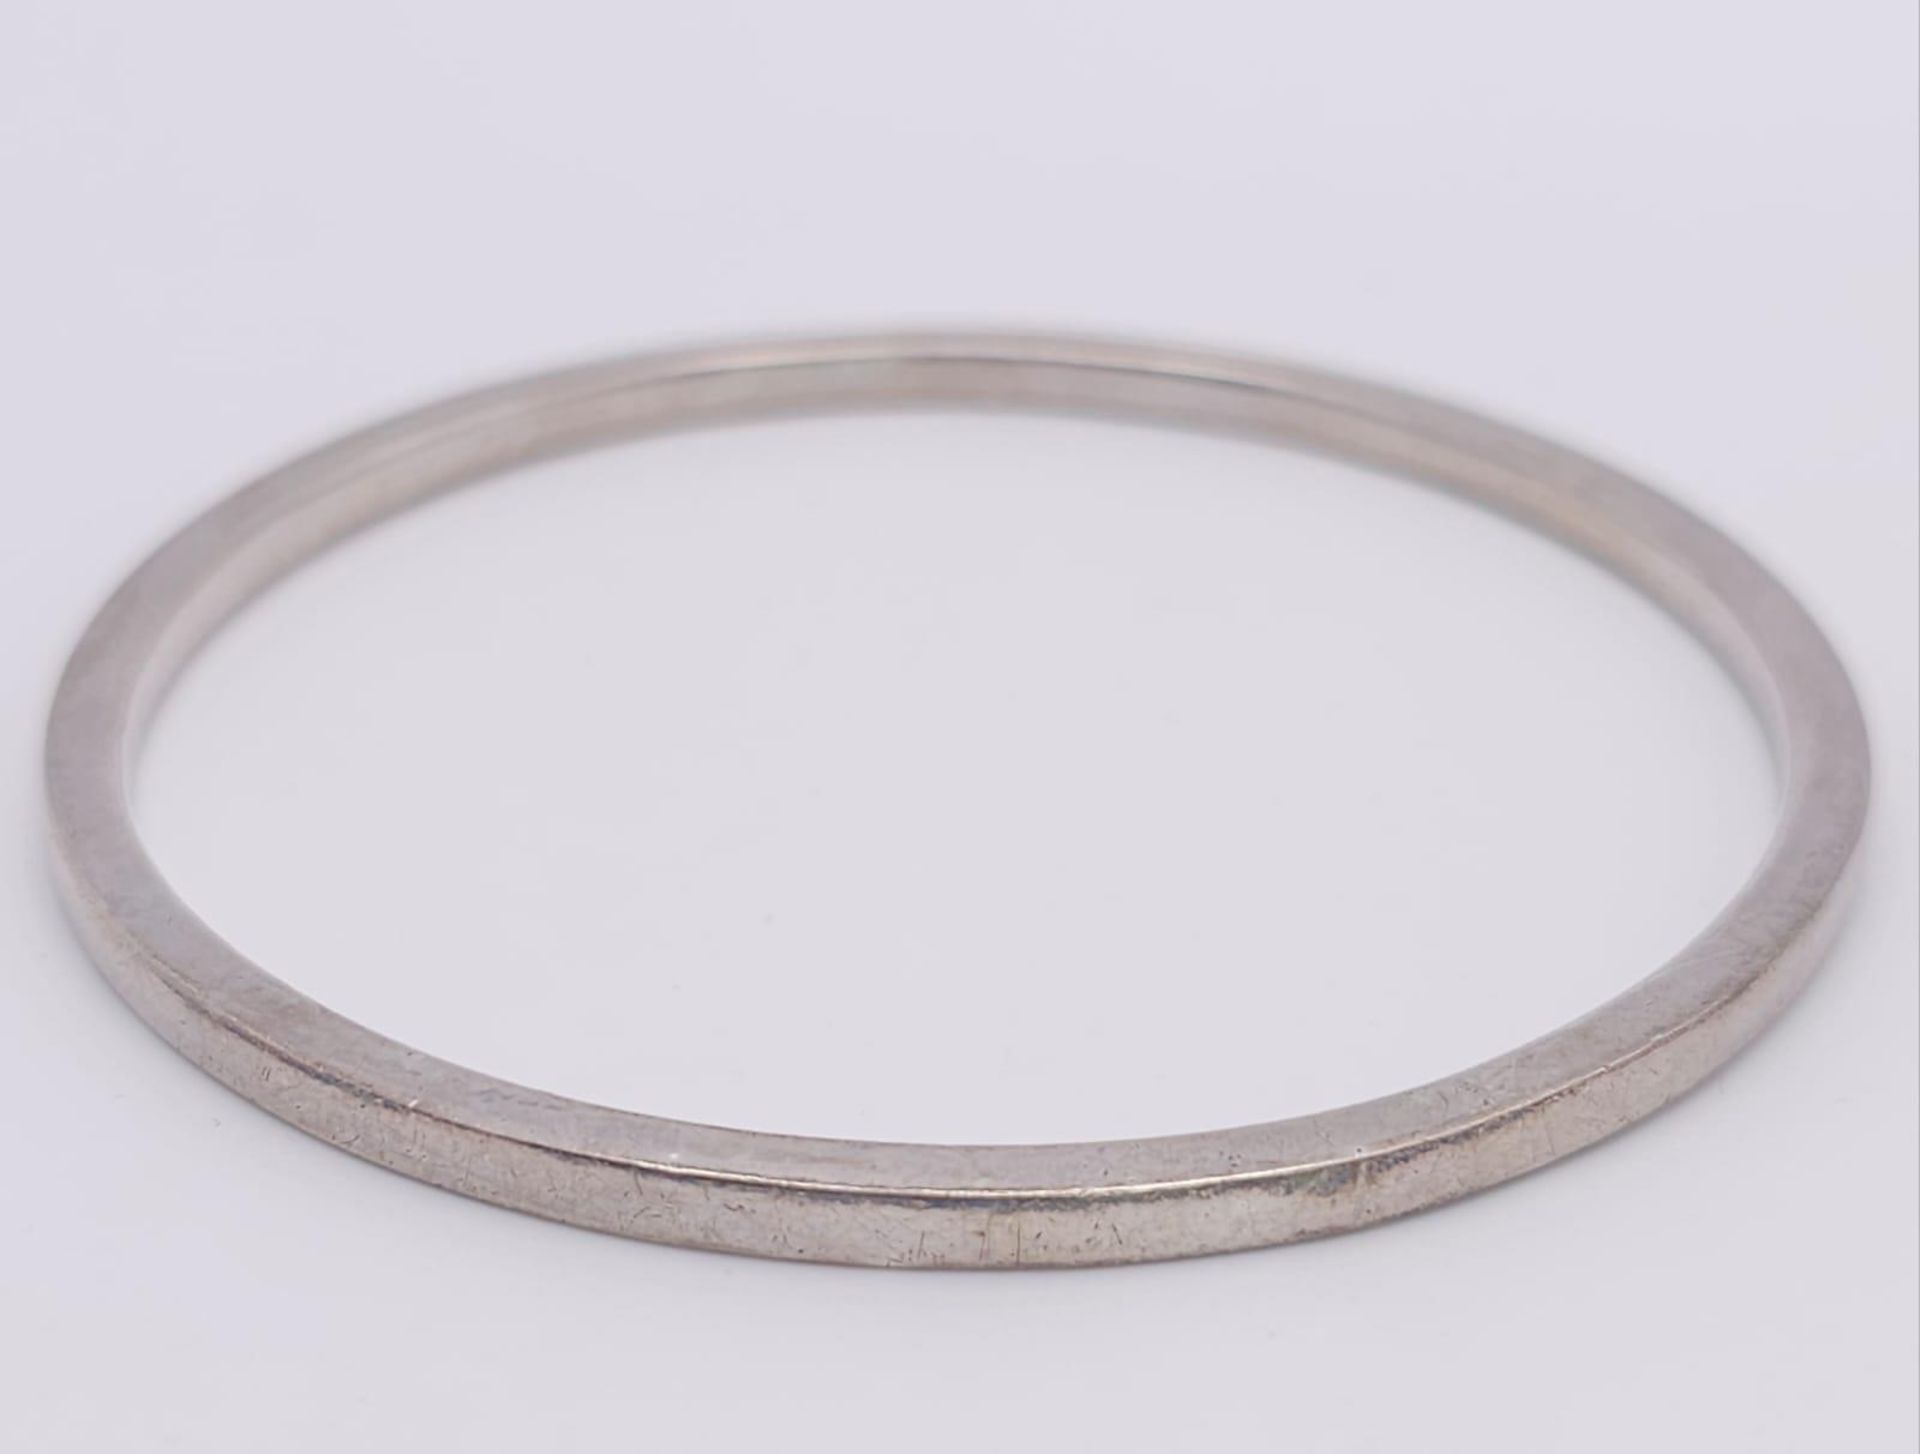 A vintage sterling silver bangle with full London hallmarks, 1978. Total weight 20.7G. Diameter 7cm. - Image 4 of 5